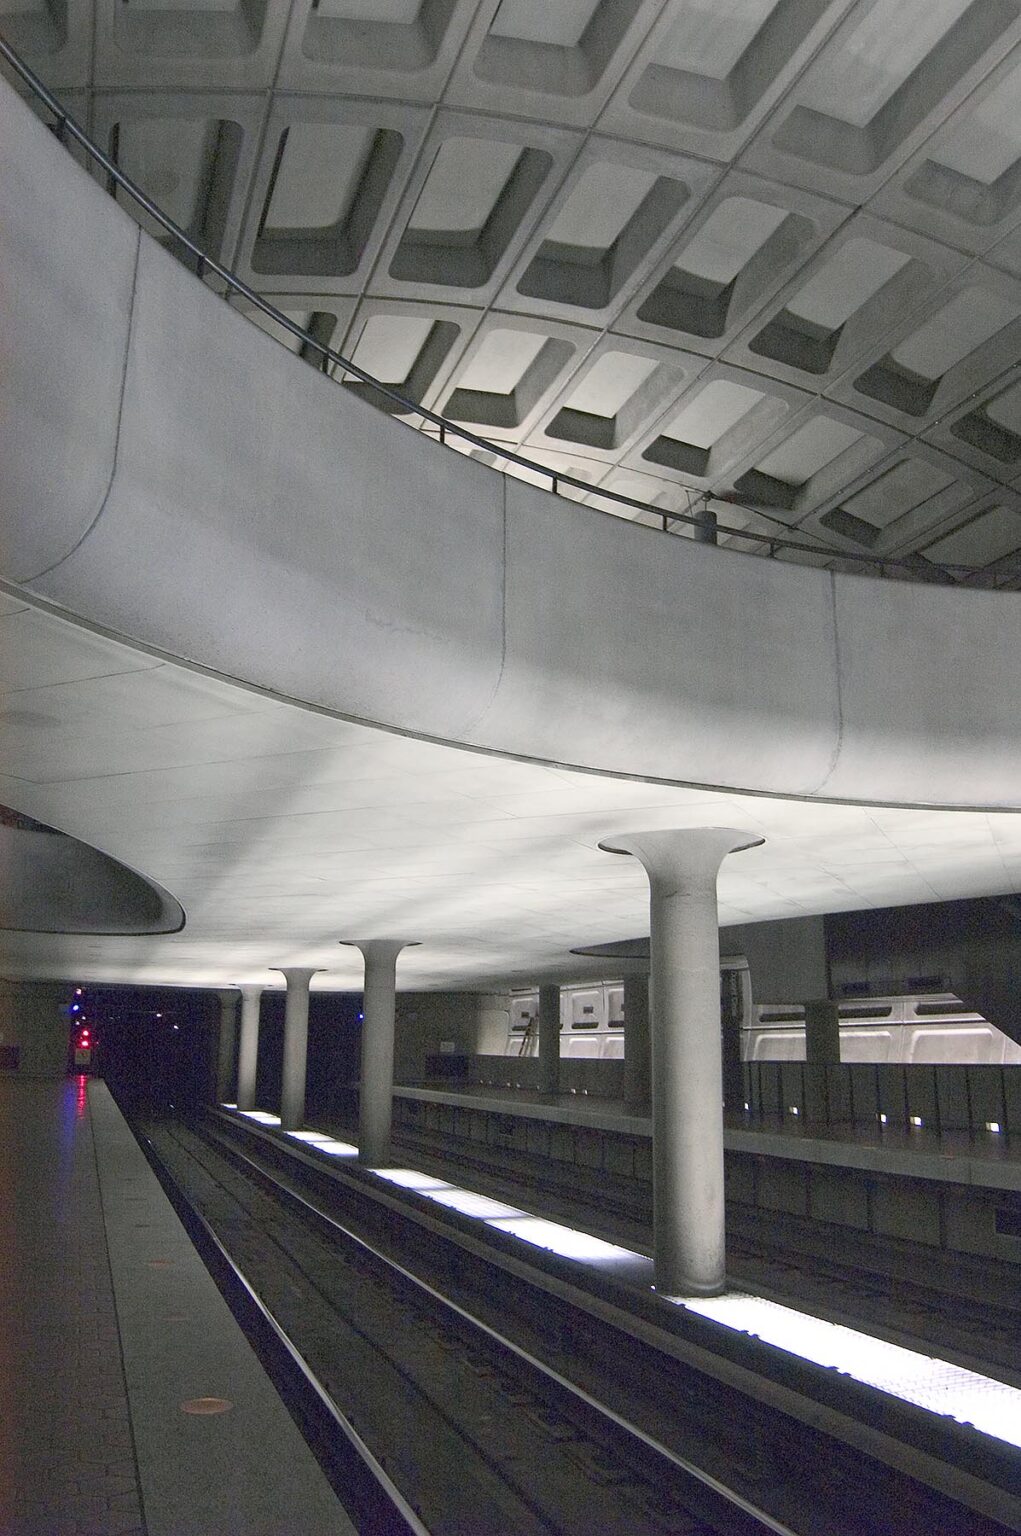 UNDERGROUND SUBWAY with CEMENT TUBE CONSTRUCTION - WASHINGTON DC, DISTRICT OF COLUMBIA, USA